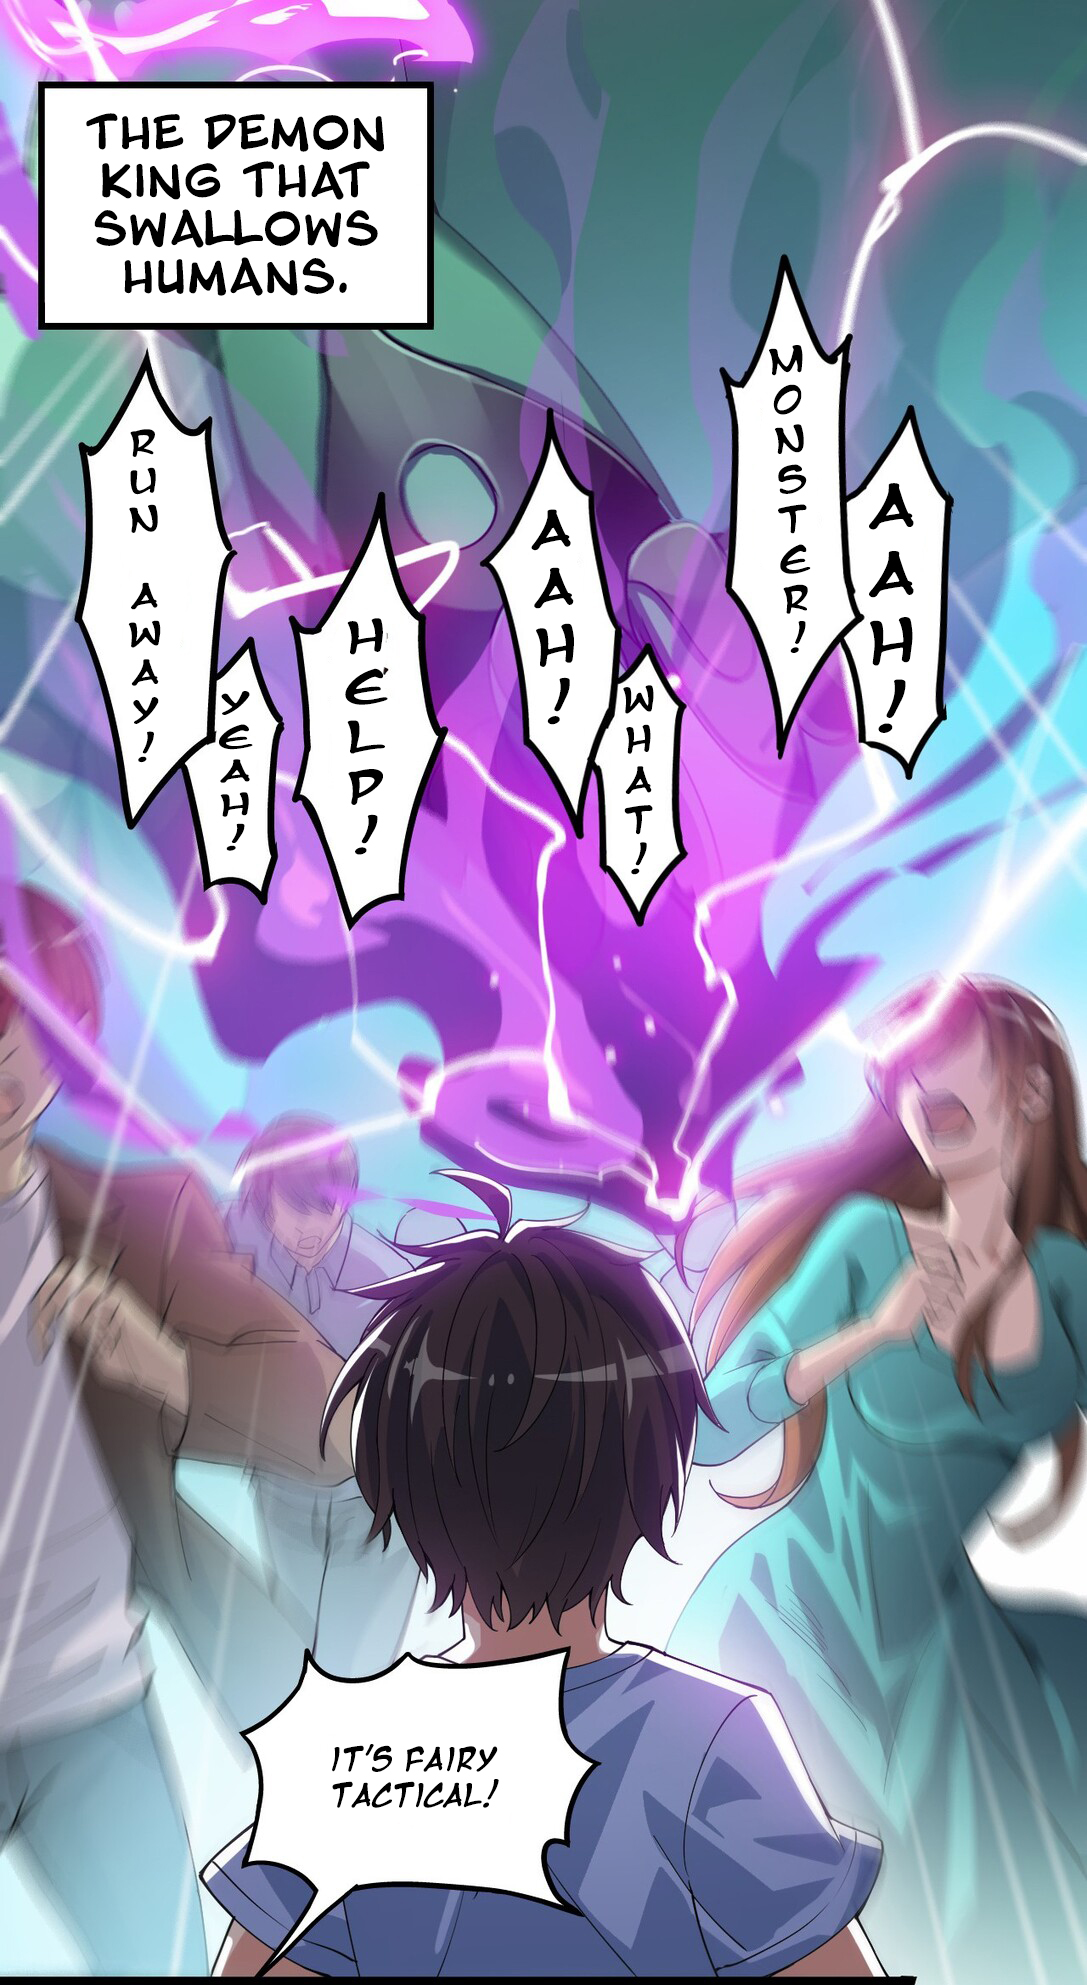 Fairy King's Daily Life Ch. 1.1 The demon king is coming!